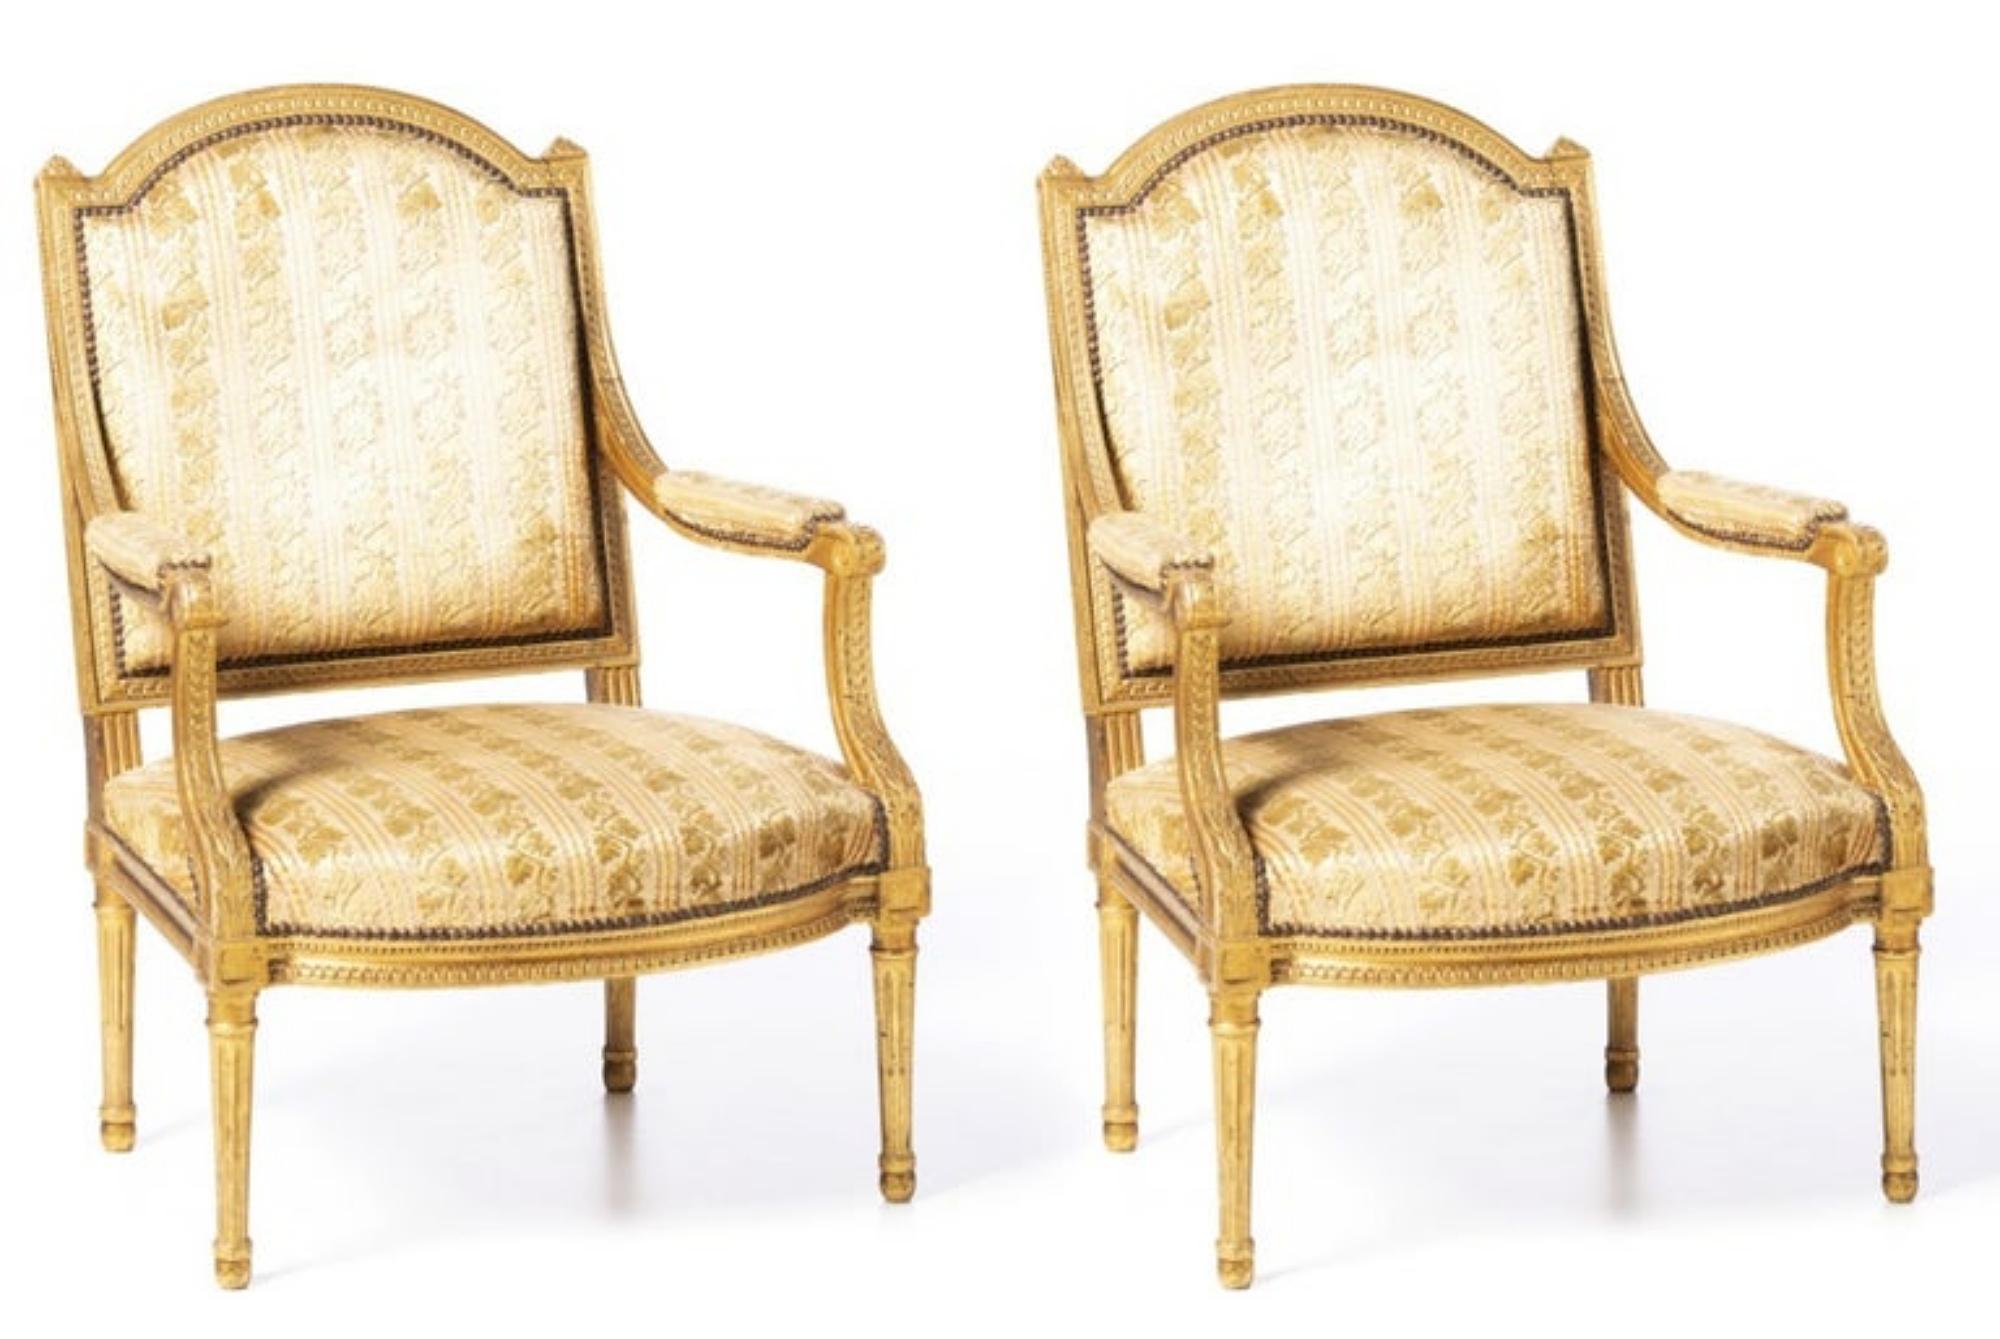 Hand-Crafted Pair of French Louis XVI Style Fauteuils, 19th Century For Sale